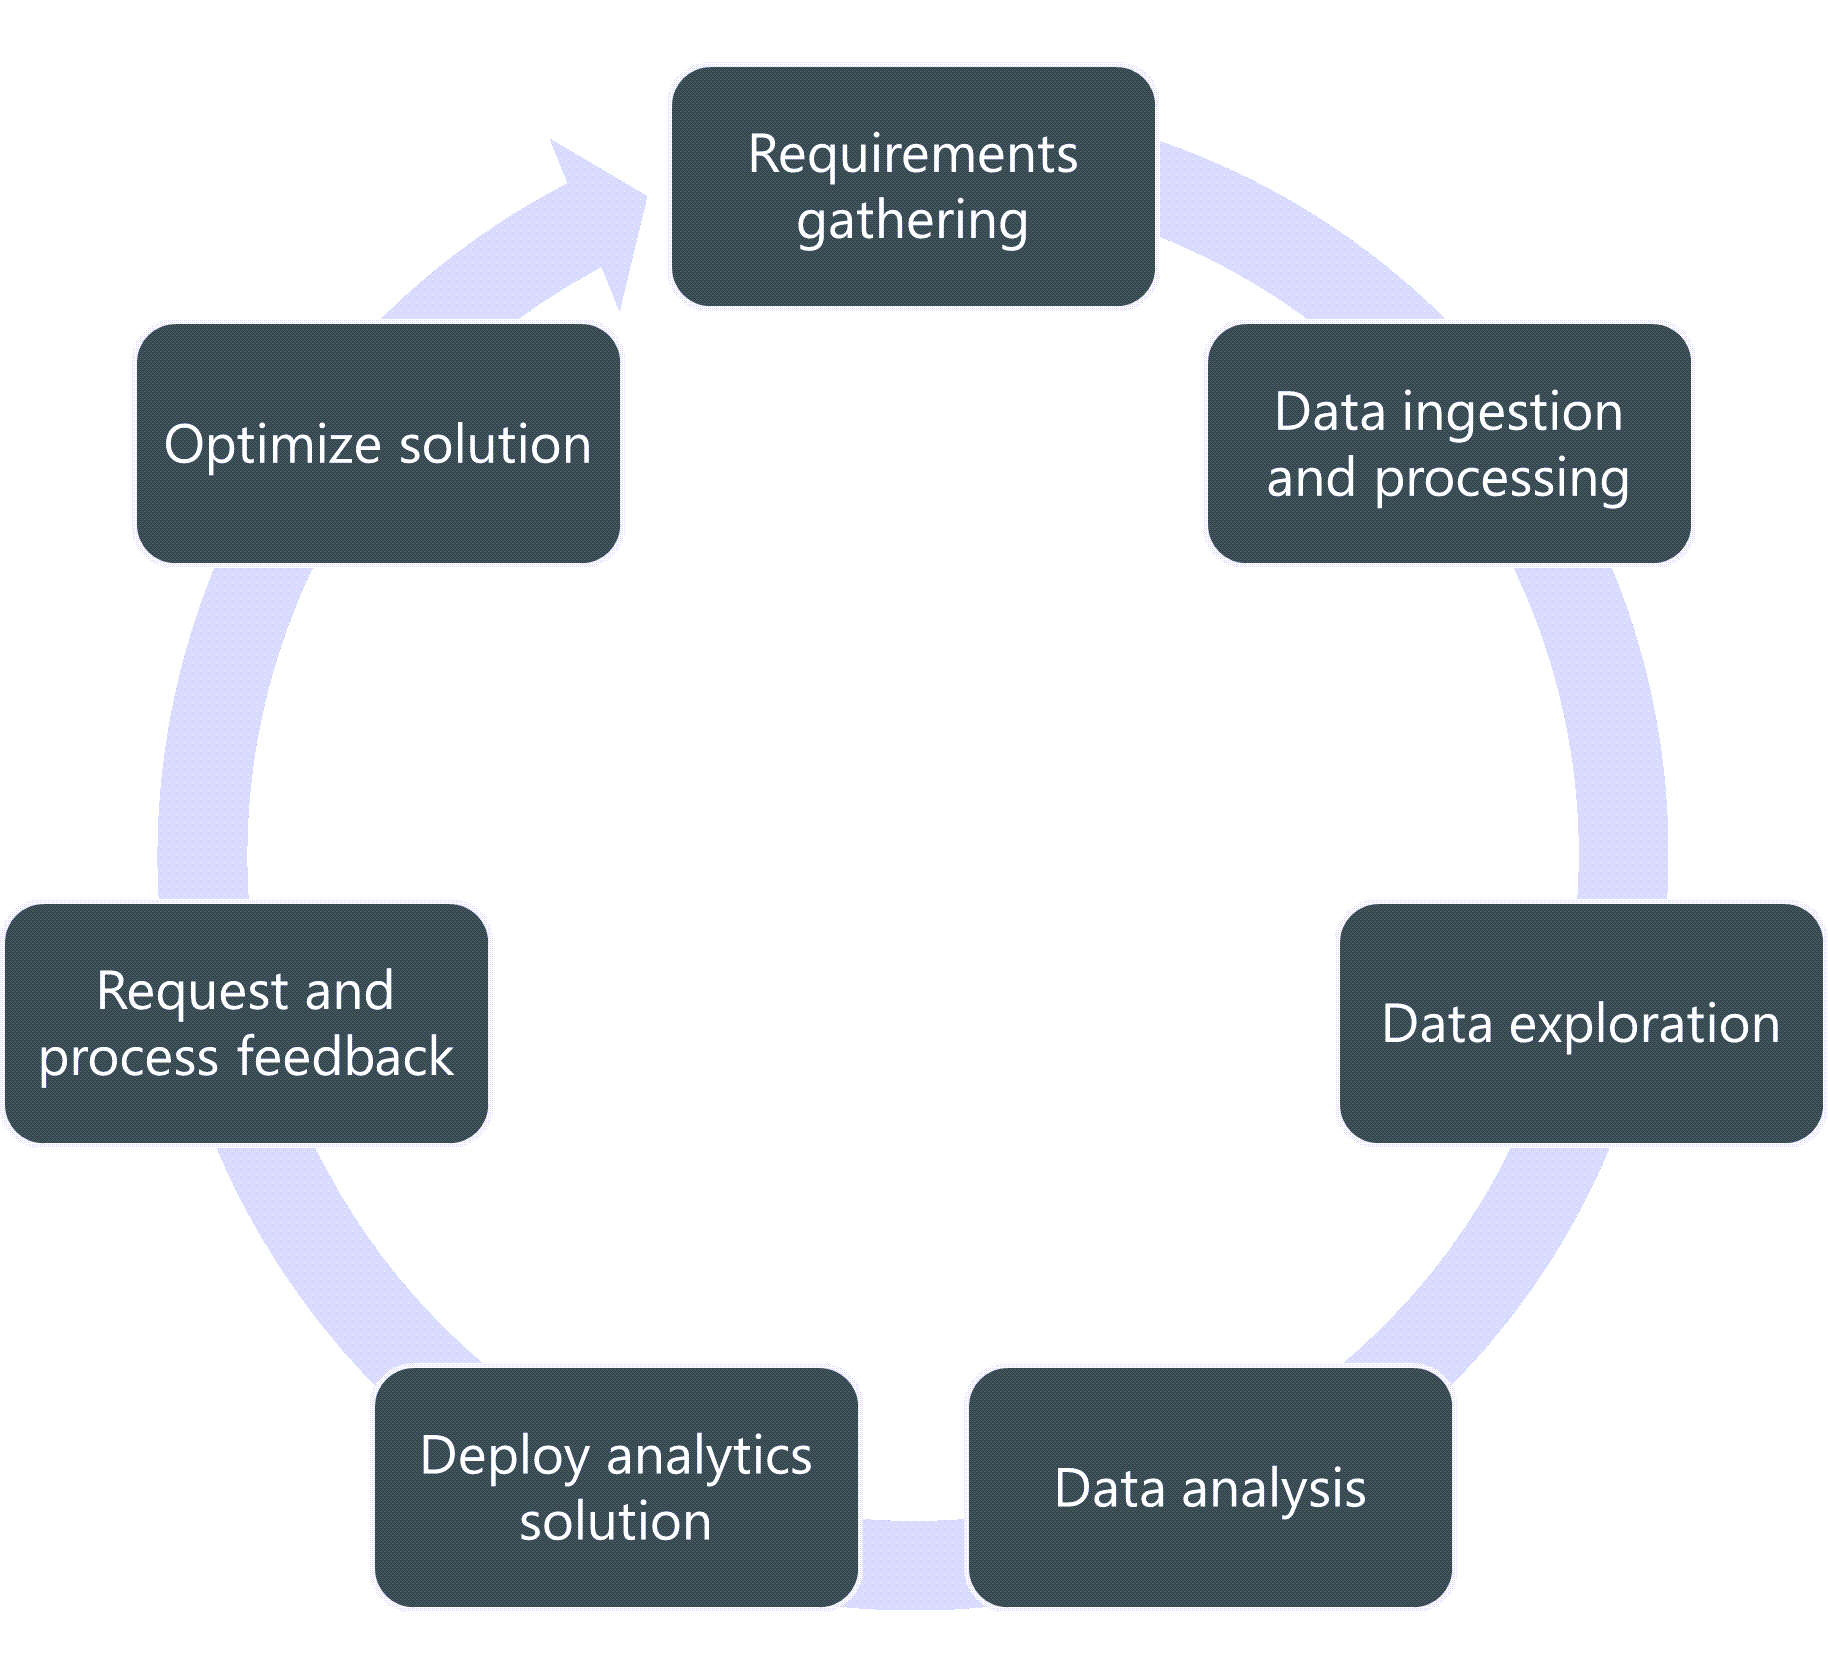 Steps in the data anlytics process portrayed in a circular process, beginning with requirements gathering, then data ingestion and processing, the data exploration, then data analysis, then deploy analytics solution, then request and process feedback, and finally optimize solution. Arrow indicates that process begins again.